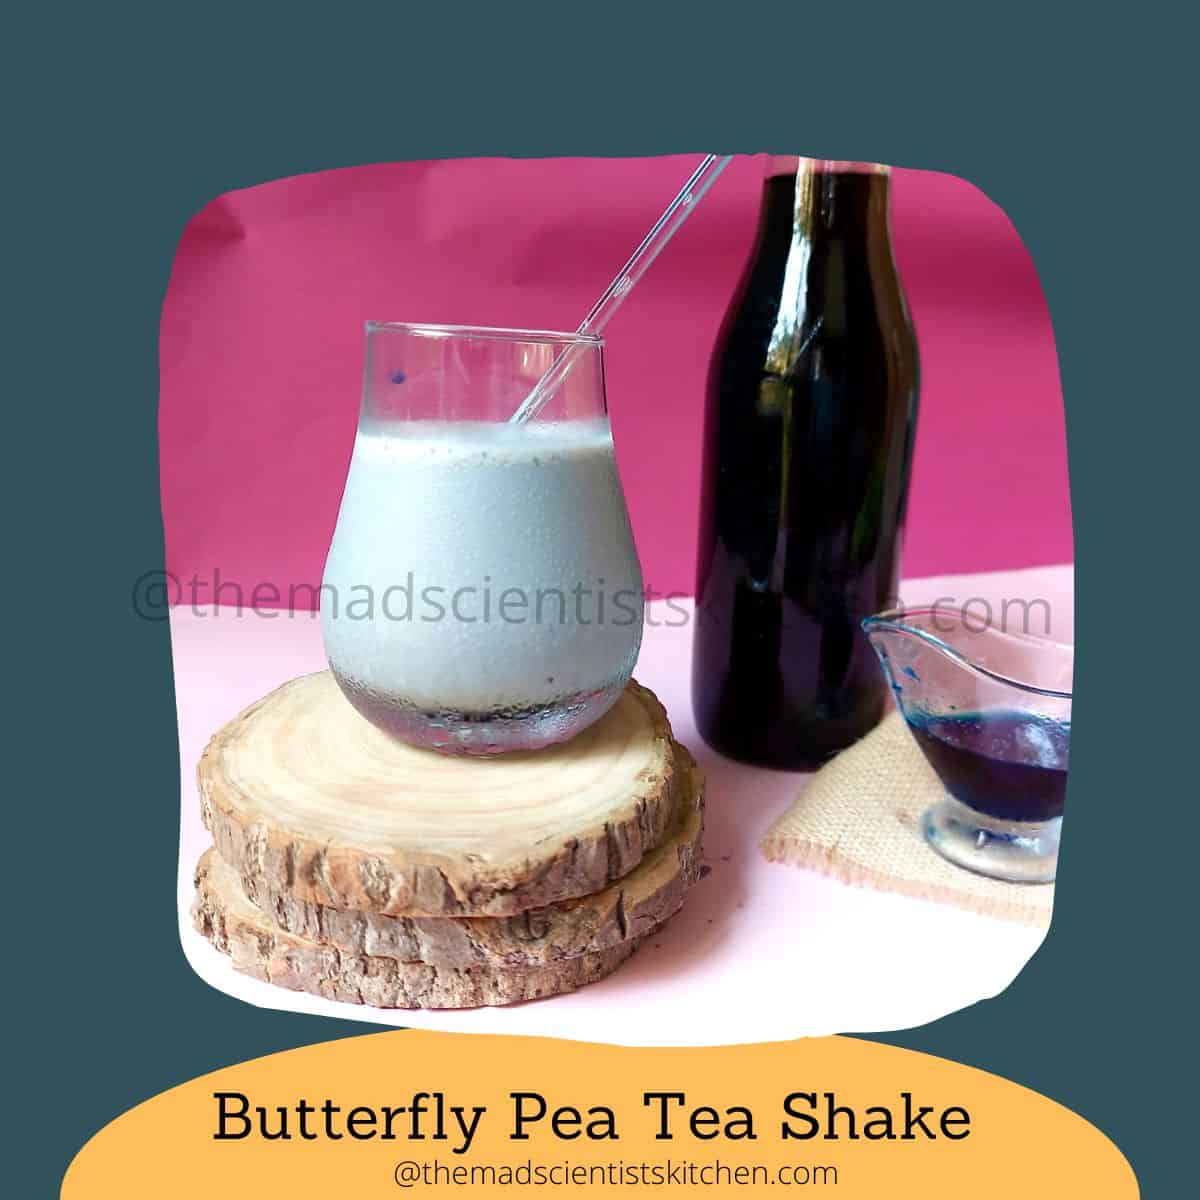 I made some Butterfly Pea Tea Shake to chill with my family and friends. Will you try it?